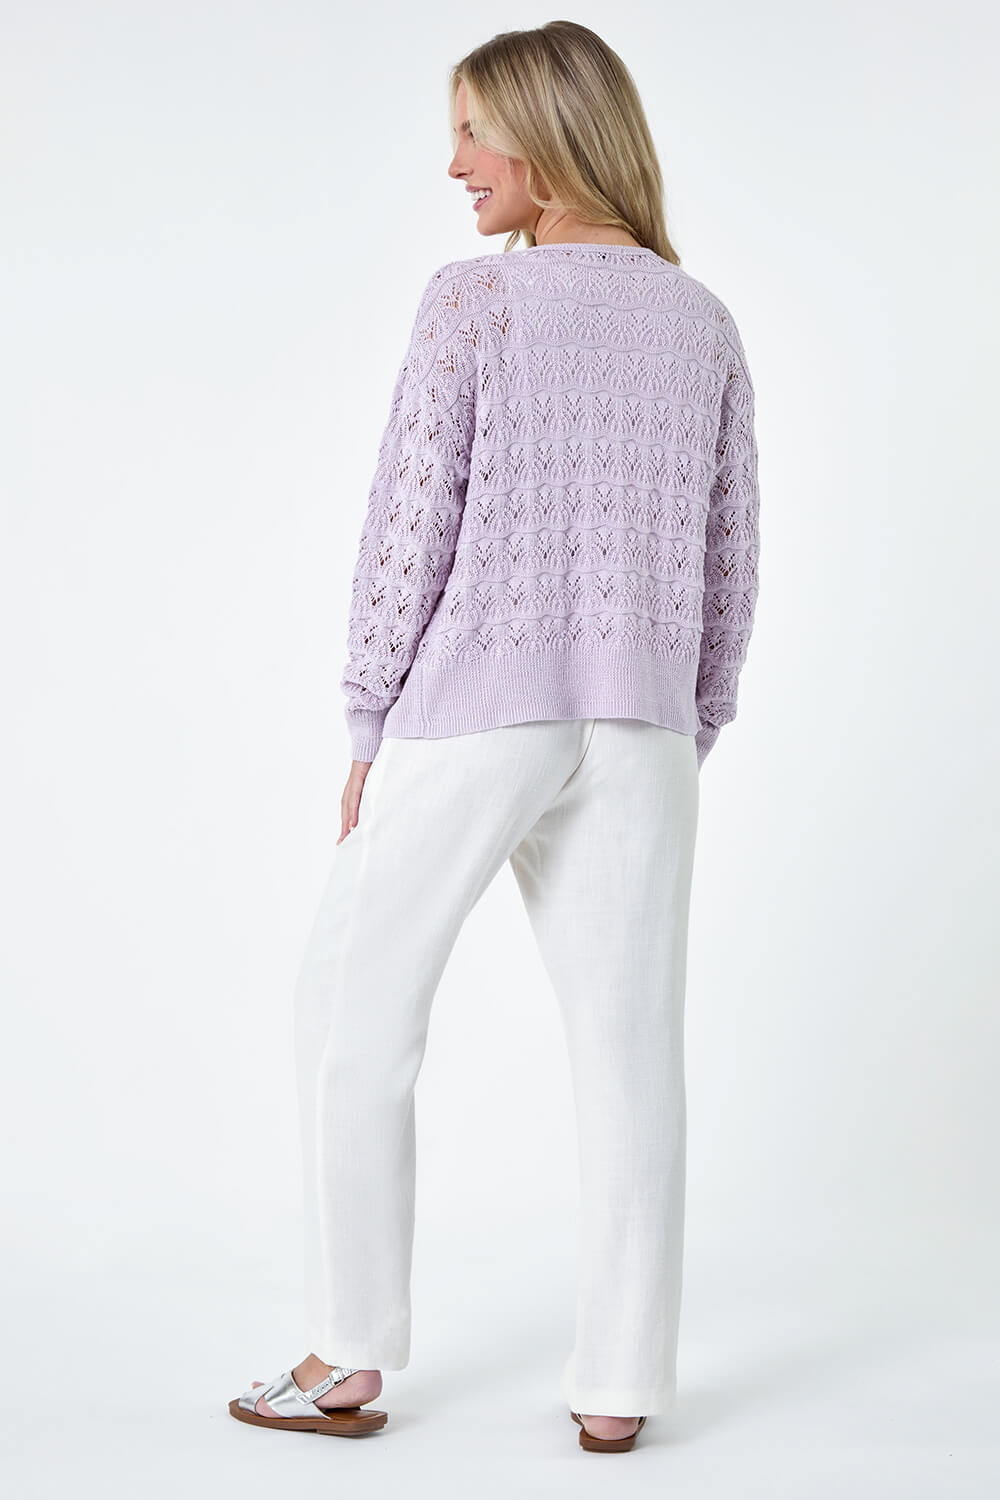 Lilac Petite Shimmer Crochet Knit Cardigan, Image 3 of 5